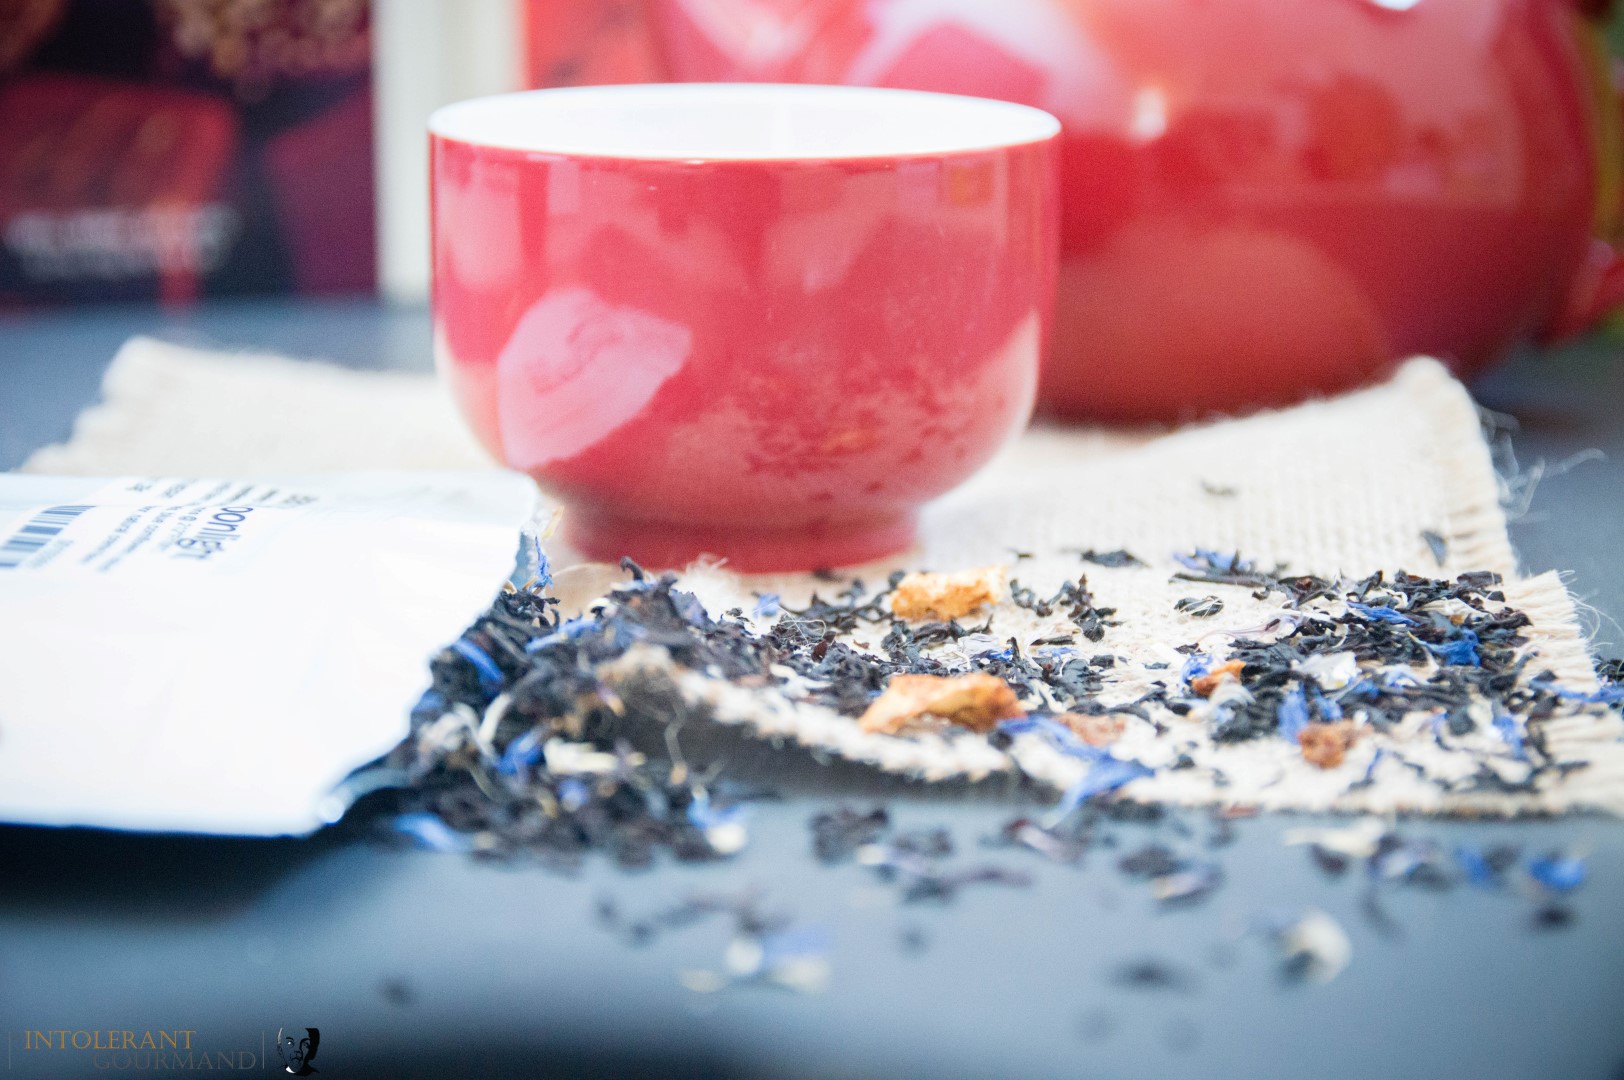 Adagio Teas - a fantastic collection of herbal, fruit, chai tea and more! Punchy flavours, stunning aromas, and your chance to get your hands on some too! www.intolerantgourmand.com